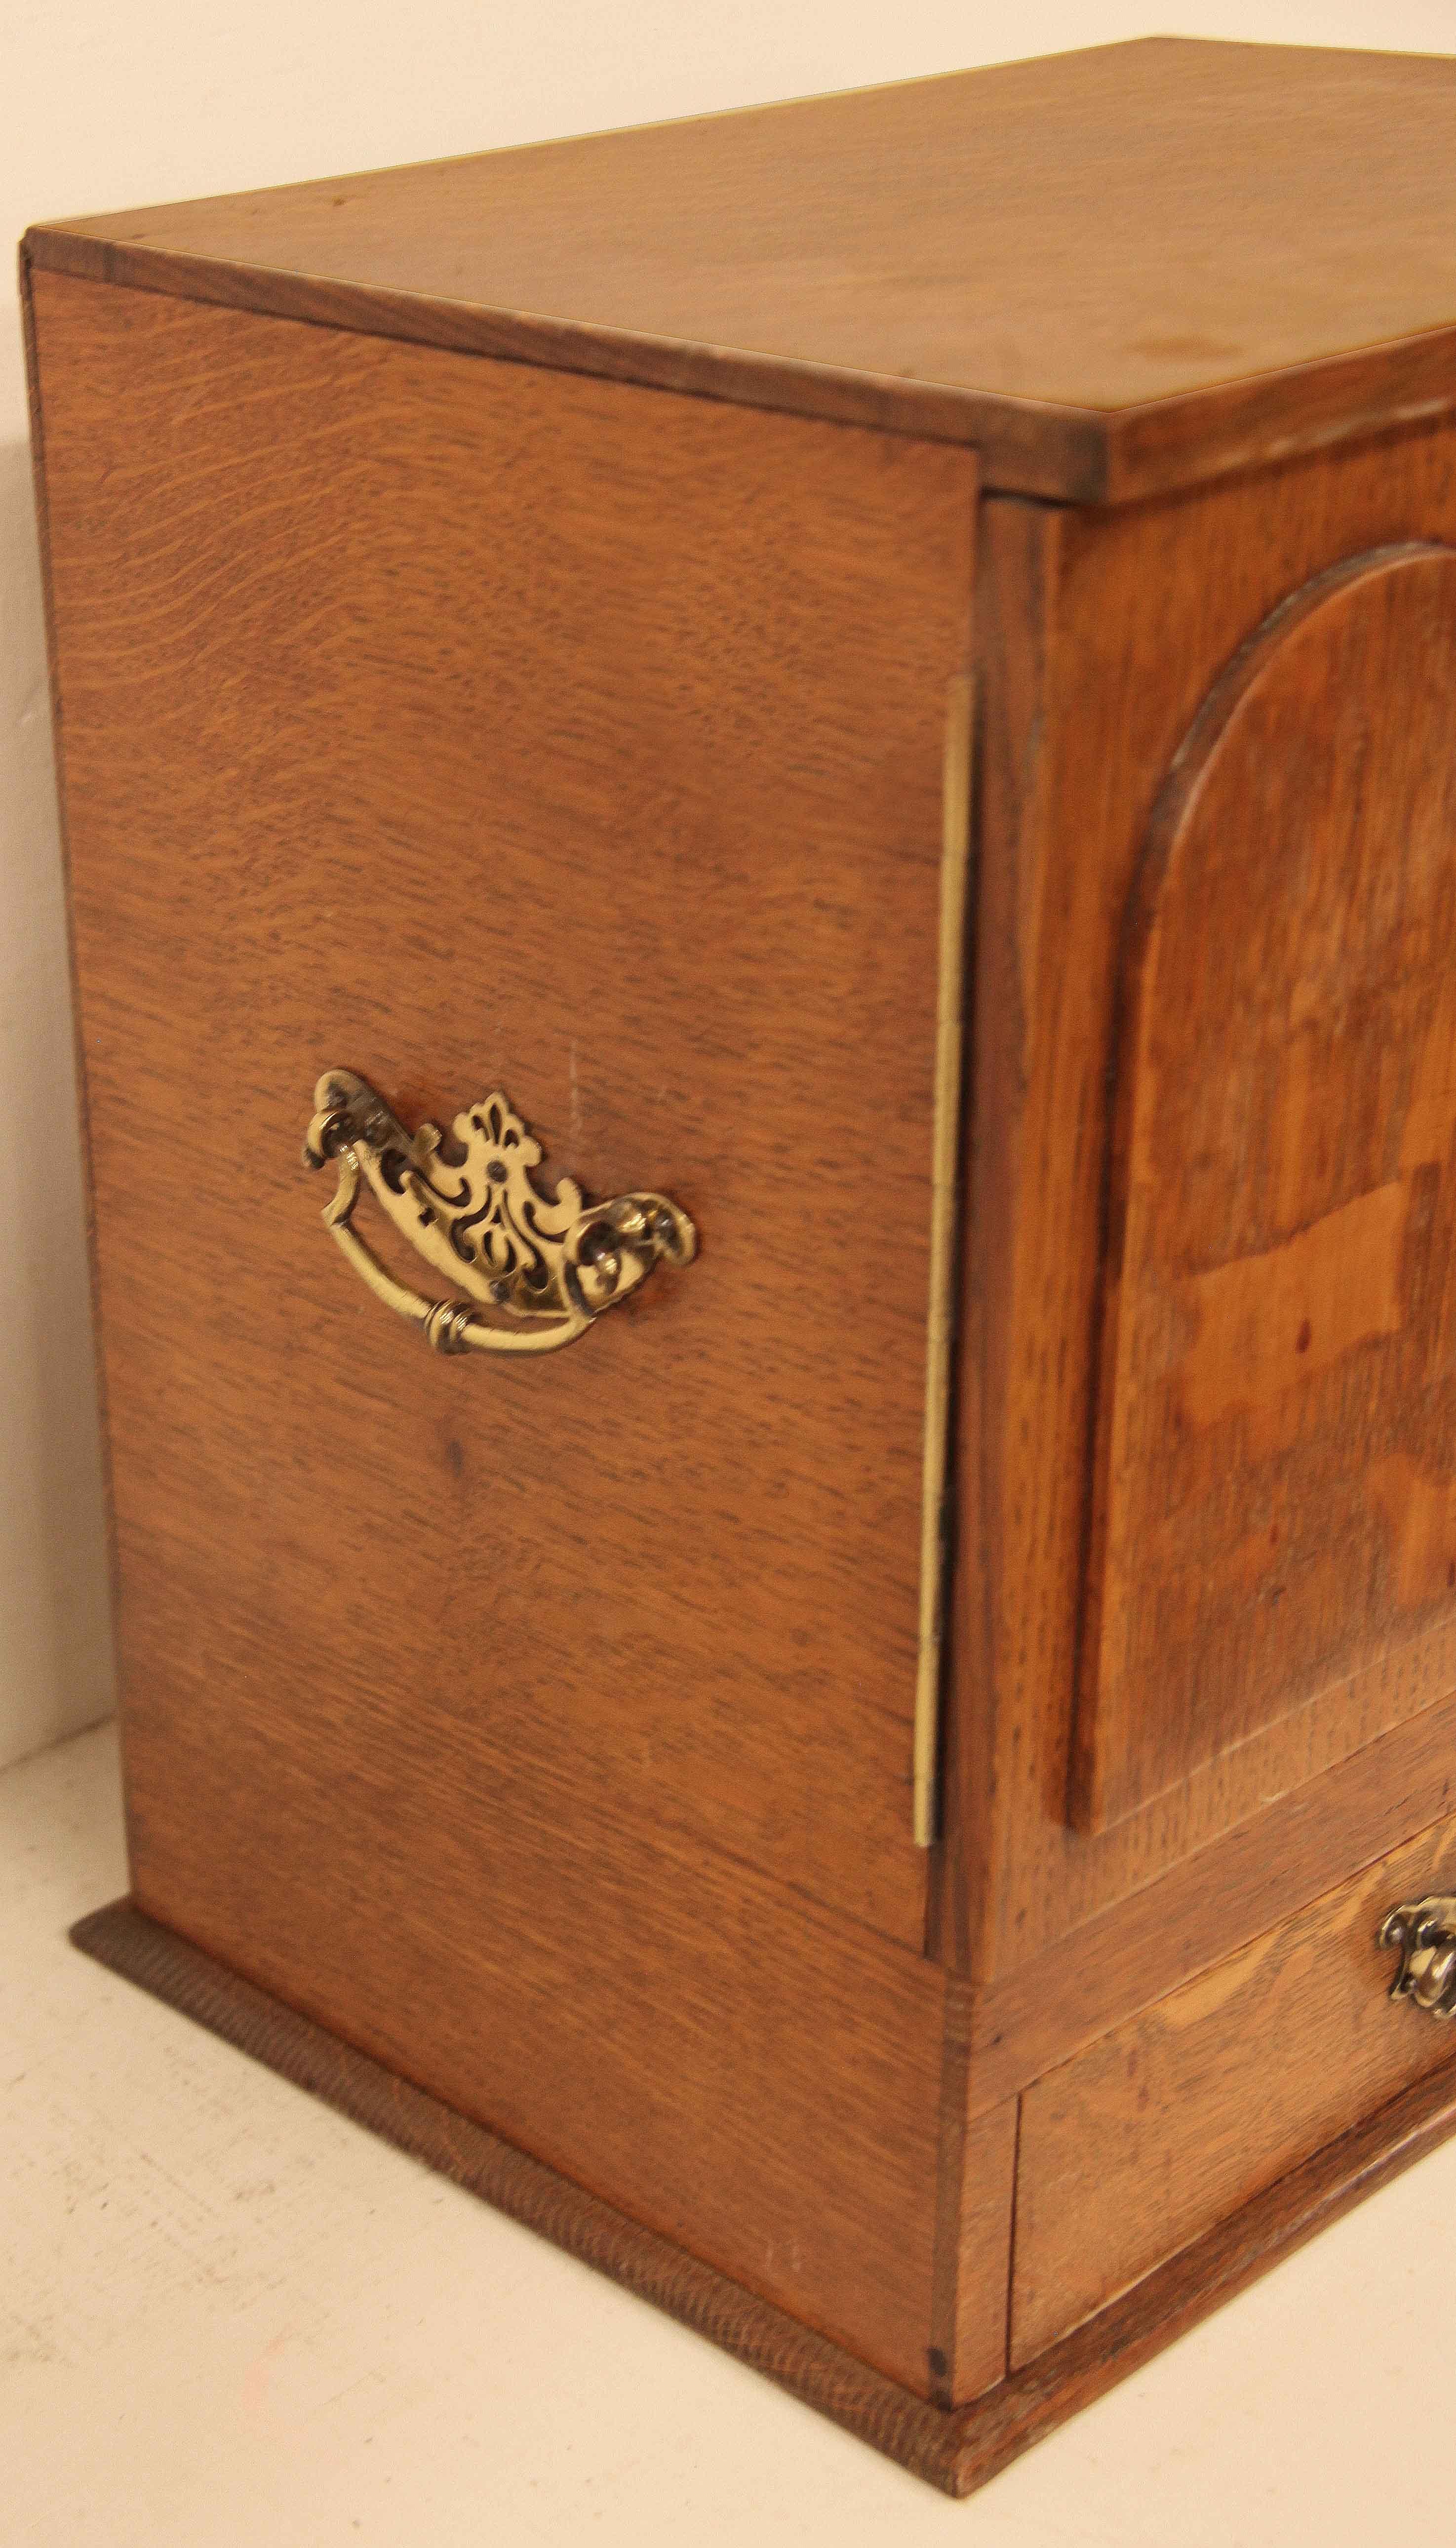 English oak smoker's cabinet, the top and doors were selected to have quarter sawn oak, the more decorative cut than straight grain oak. The sides have carrying handles.  Opening the two raised panel doors reveals two drawers ;  the exterior bottom